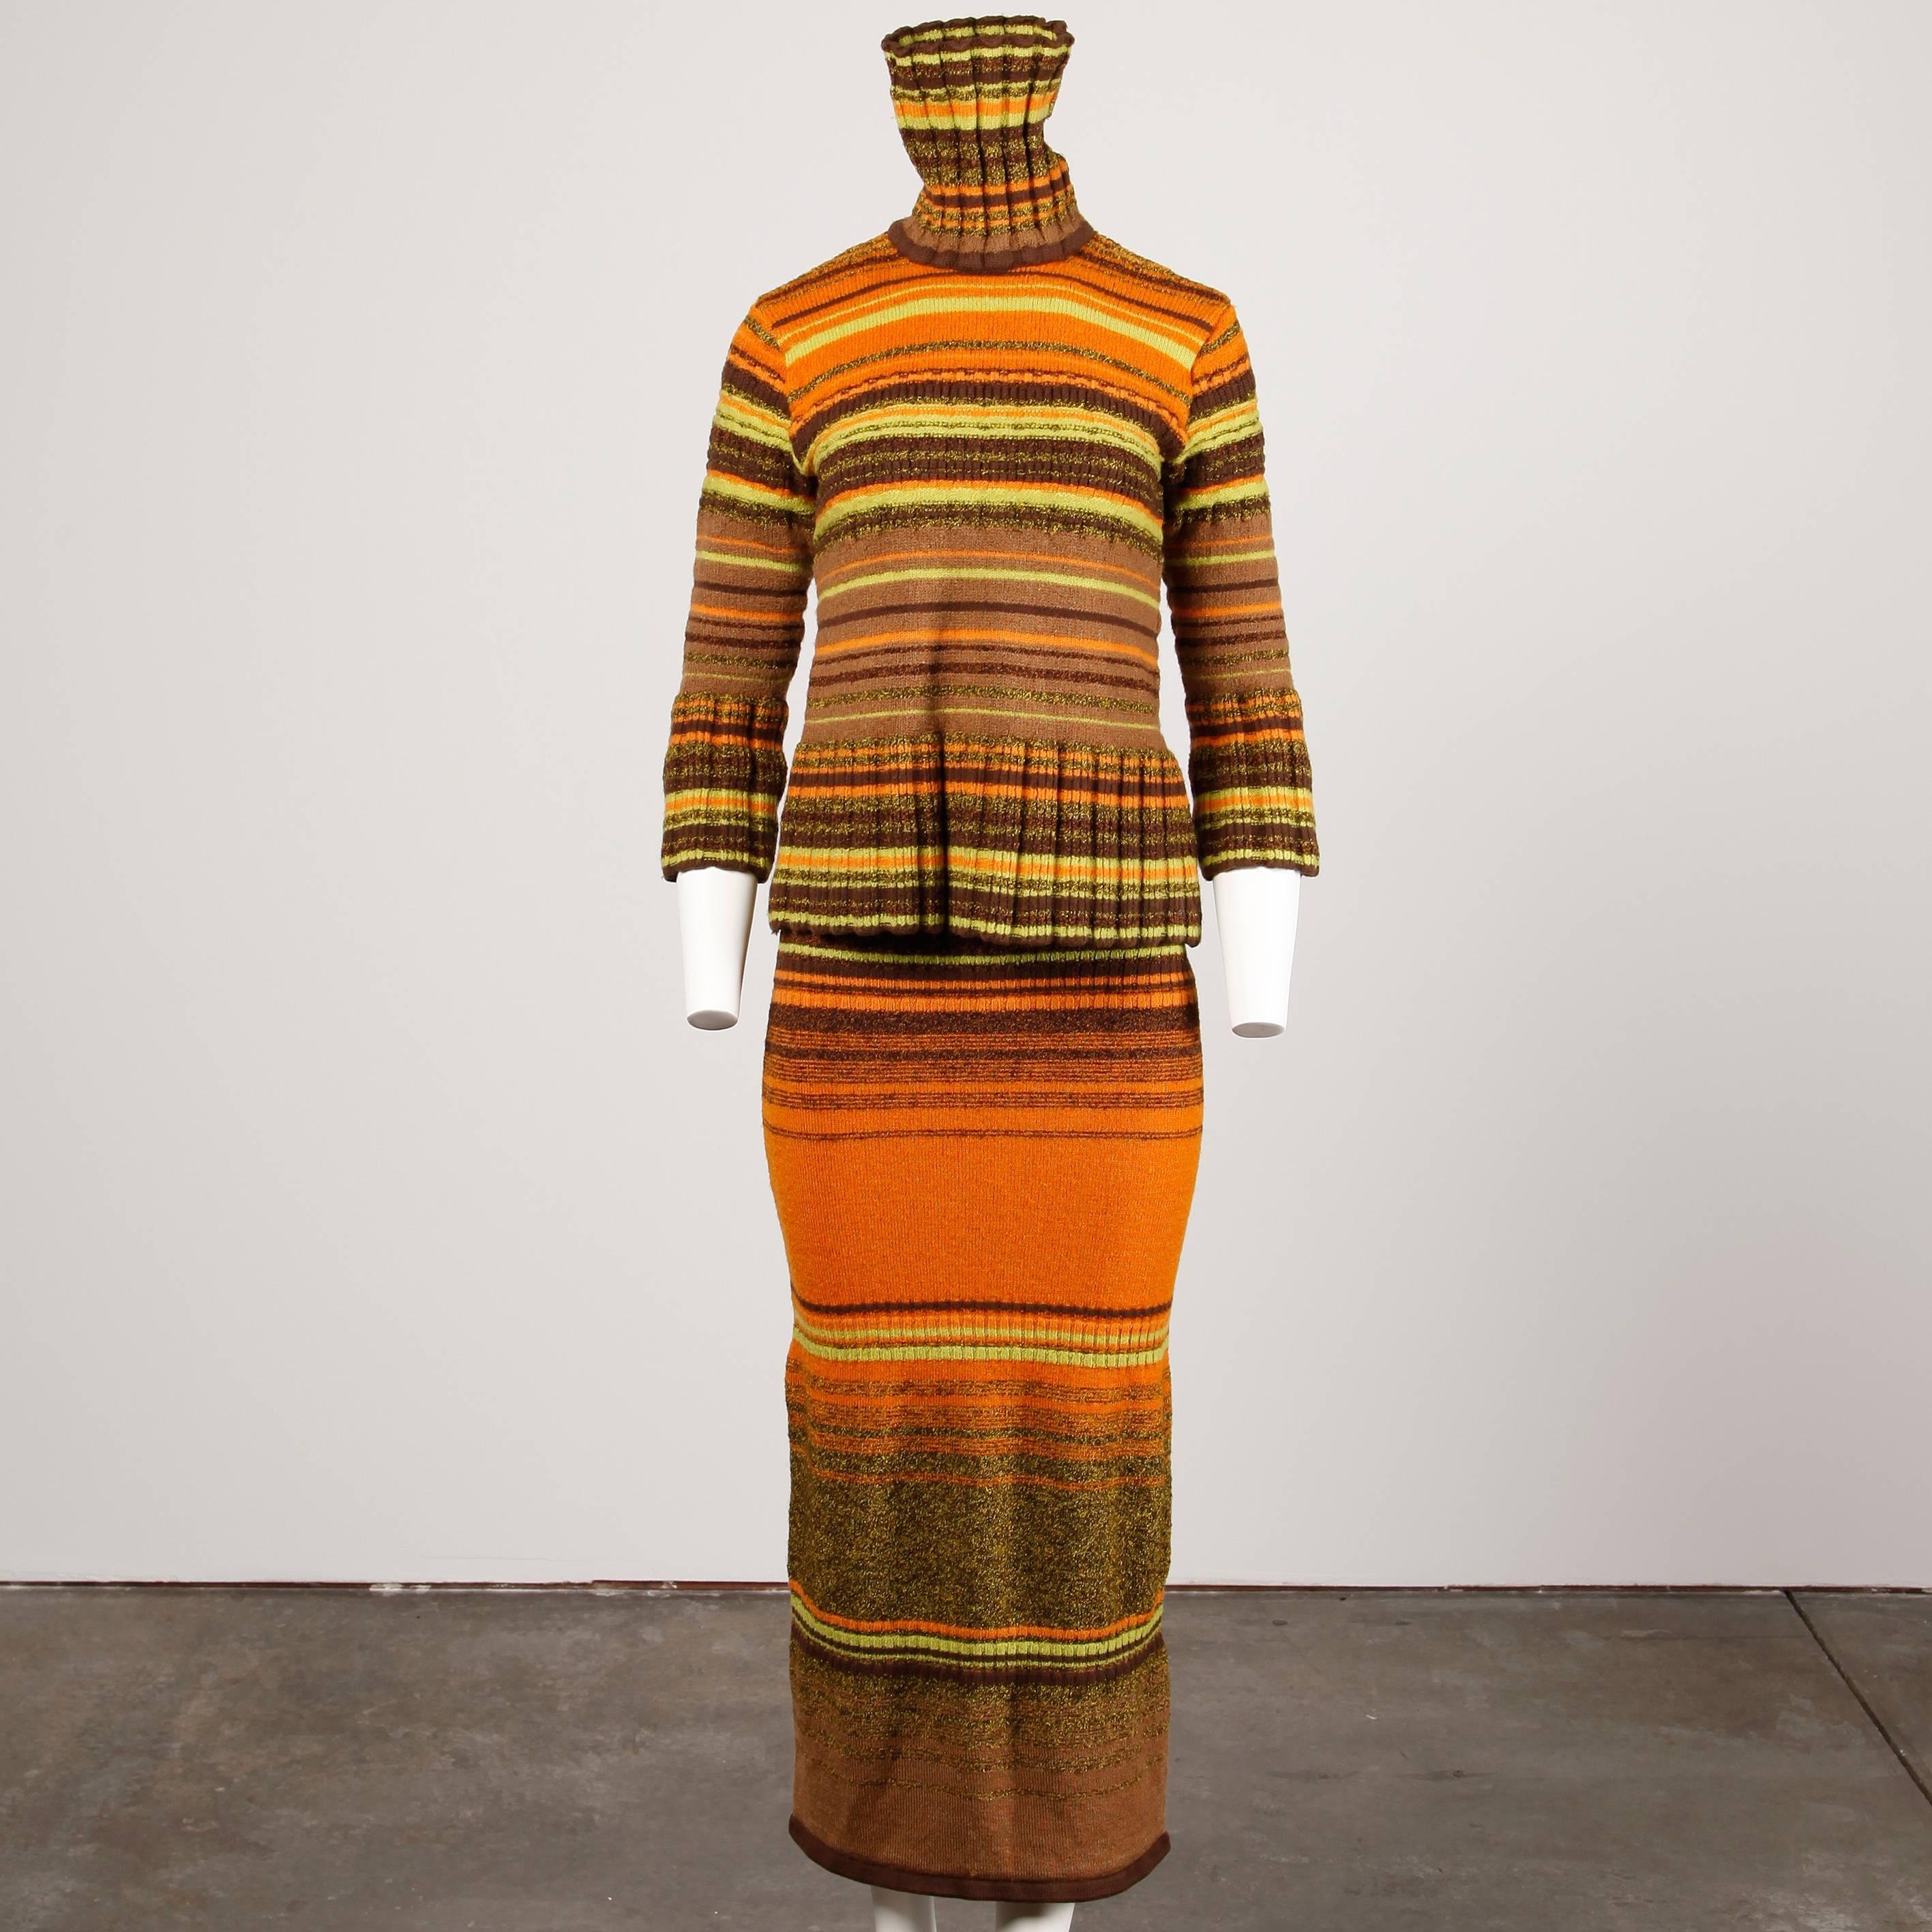 Colorful vintage striped knit sweater and skirt ensemble by Christian Lacroix. Wear together or separately!

Details: 

Unlined
Marked Size: Top: S/ Skirt: M
Color: Orange/ Brown/ Green
Fabric: 66% Wool/ 19% Polyacrylic/ 8% Rayon
Label: